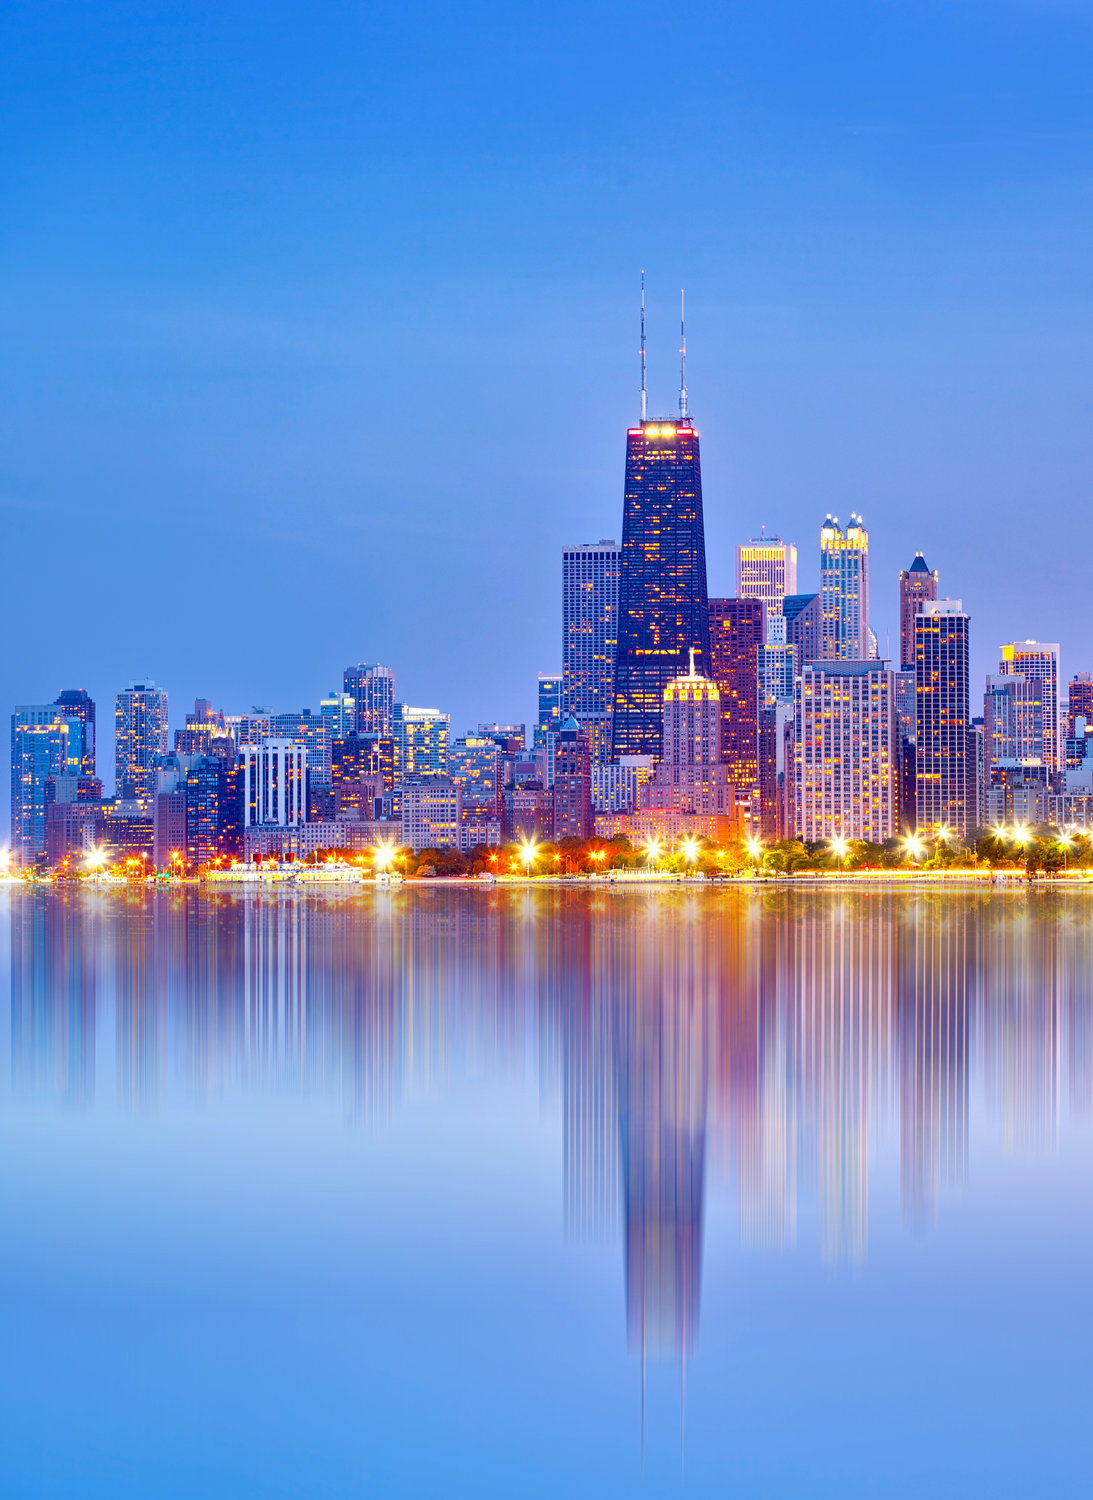 The first Annual Meeting after the merger of Inland and SNPA will take place in Chicago under a new name and renewed strength in numbers and reach.